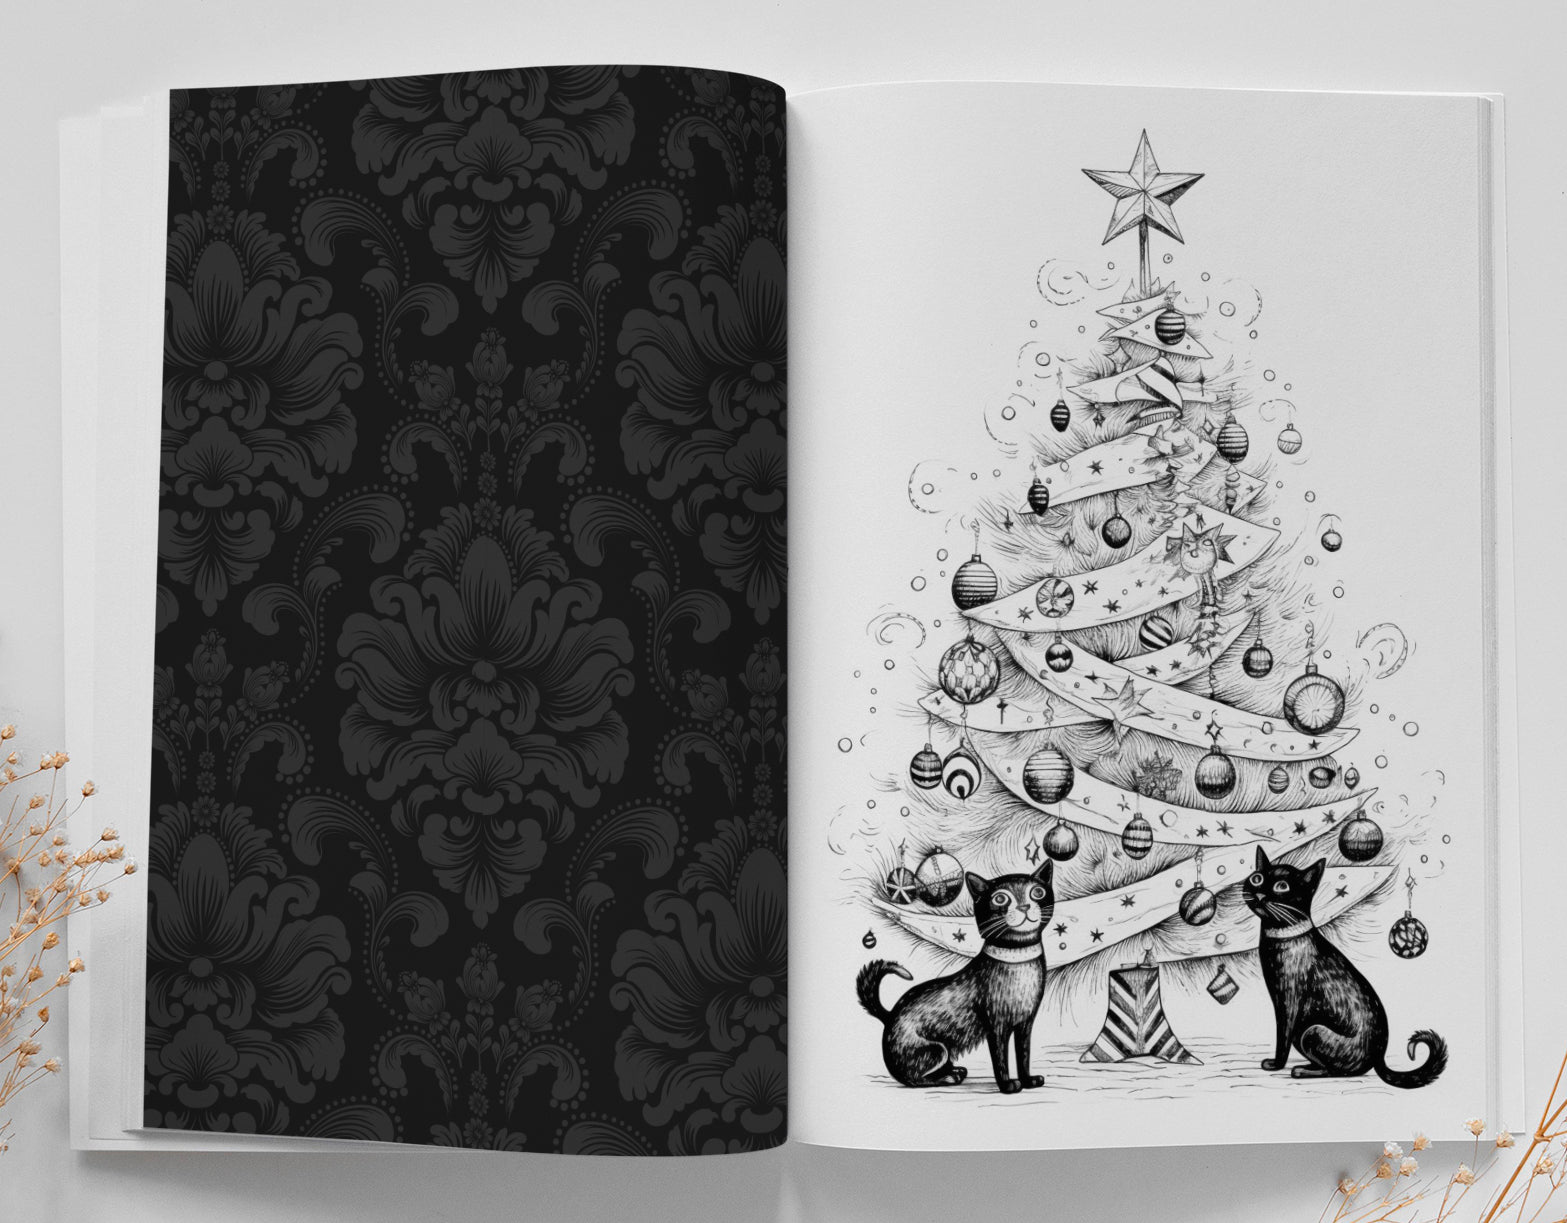 Cats in Christmas Trees Coloring Book Grayscale (Digital) - Monsoon Publishing USA